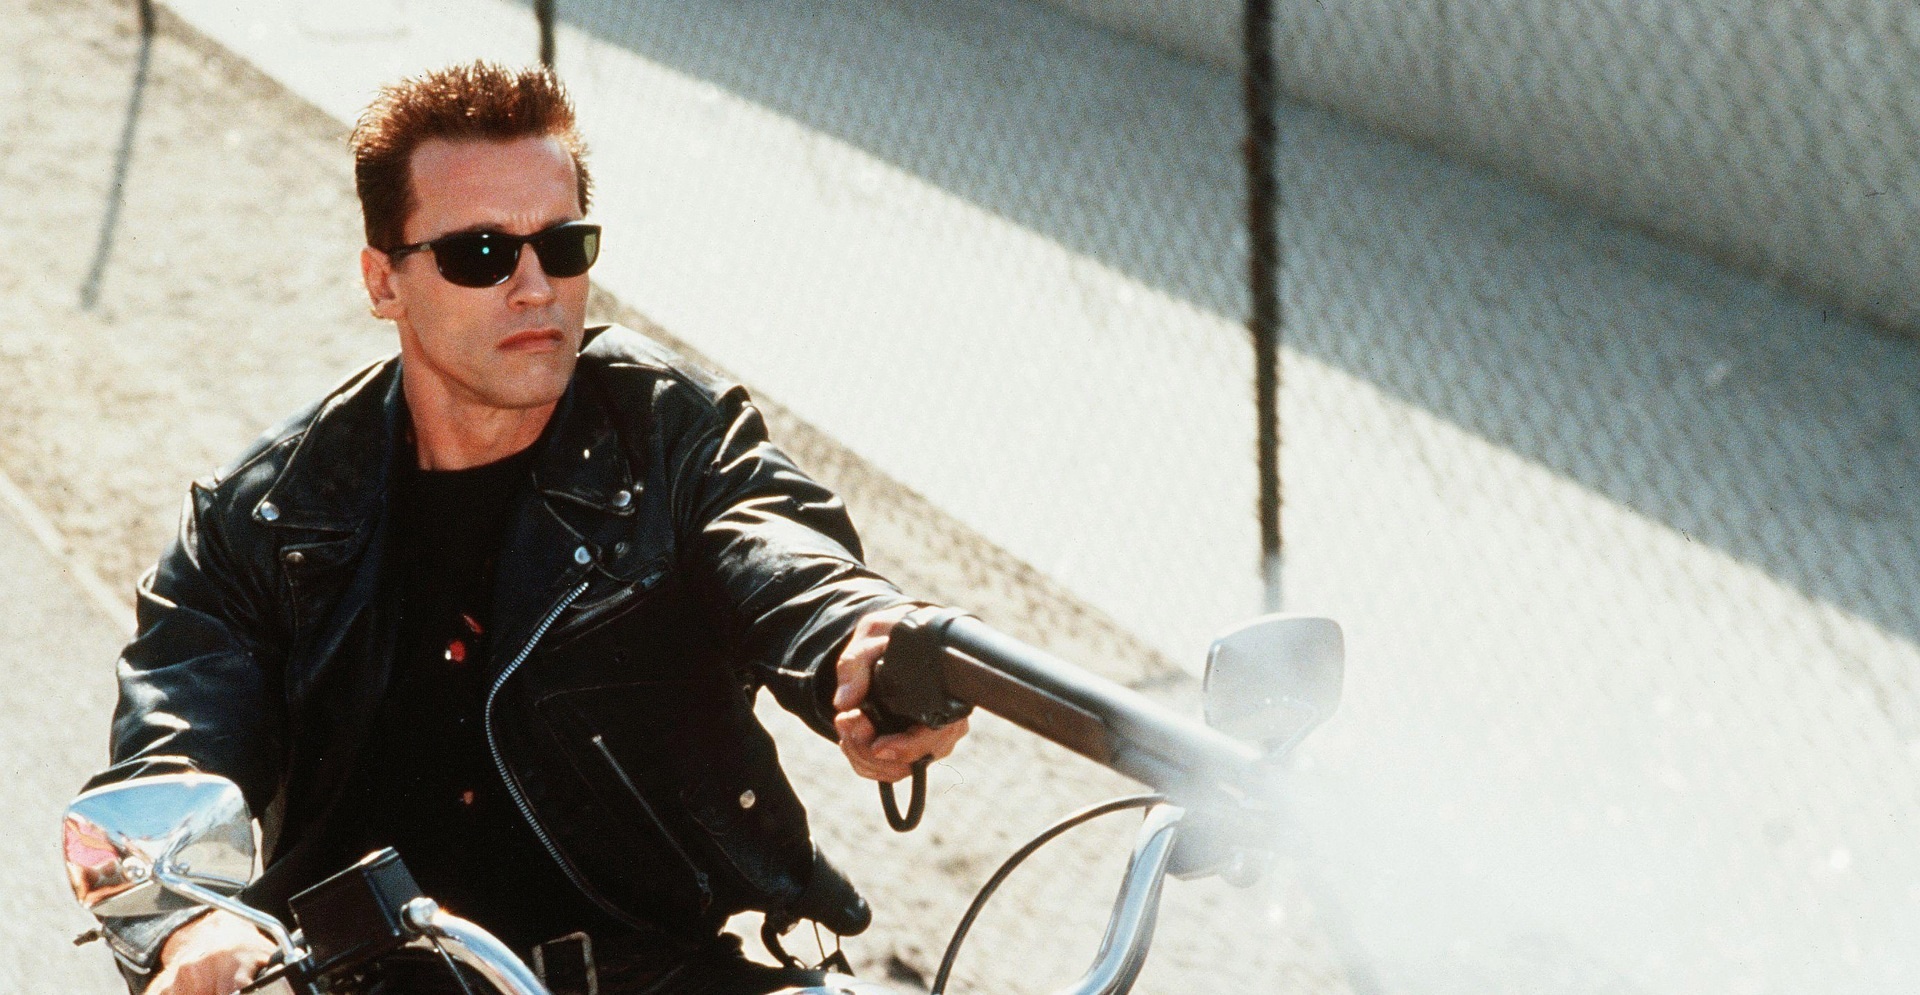 Terminator 2: Judgment Day Blu-Ray Steelbook will be a KimchiDVD Exclusive in Korea